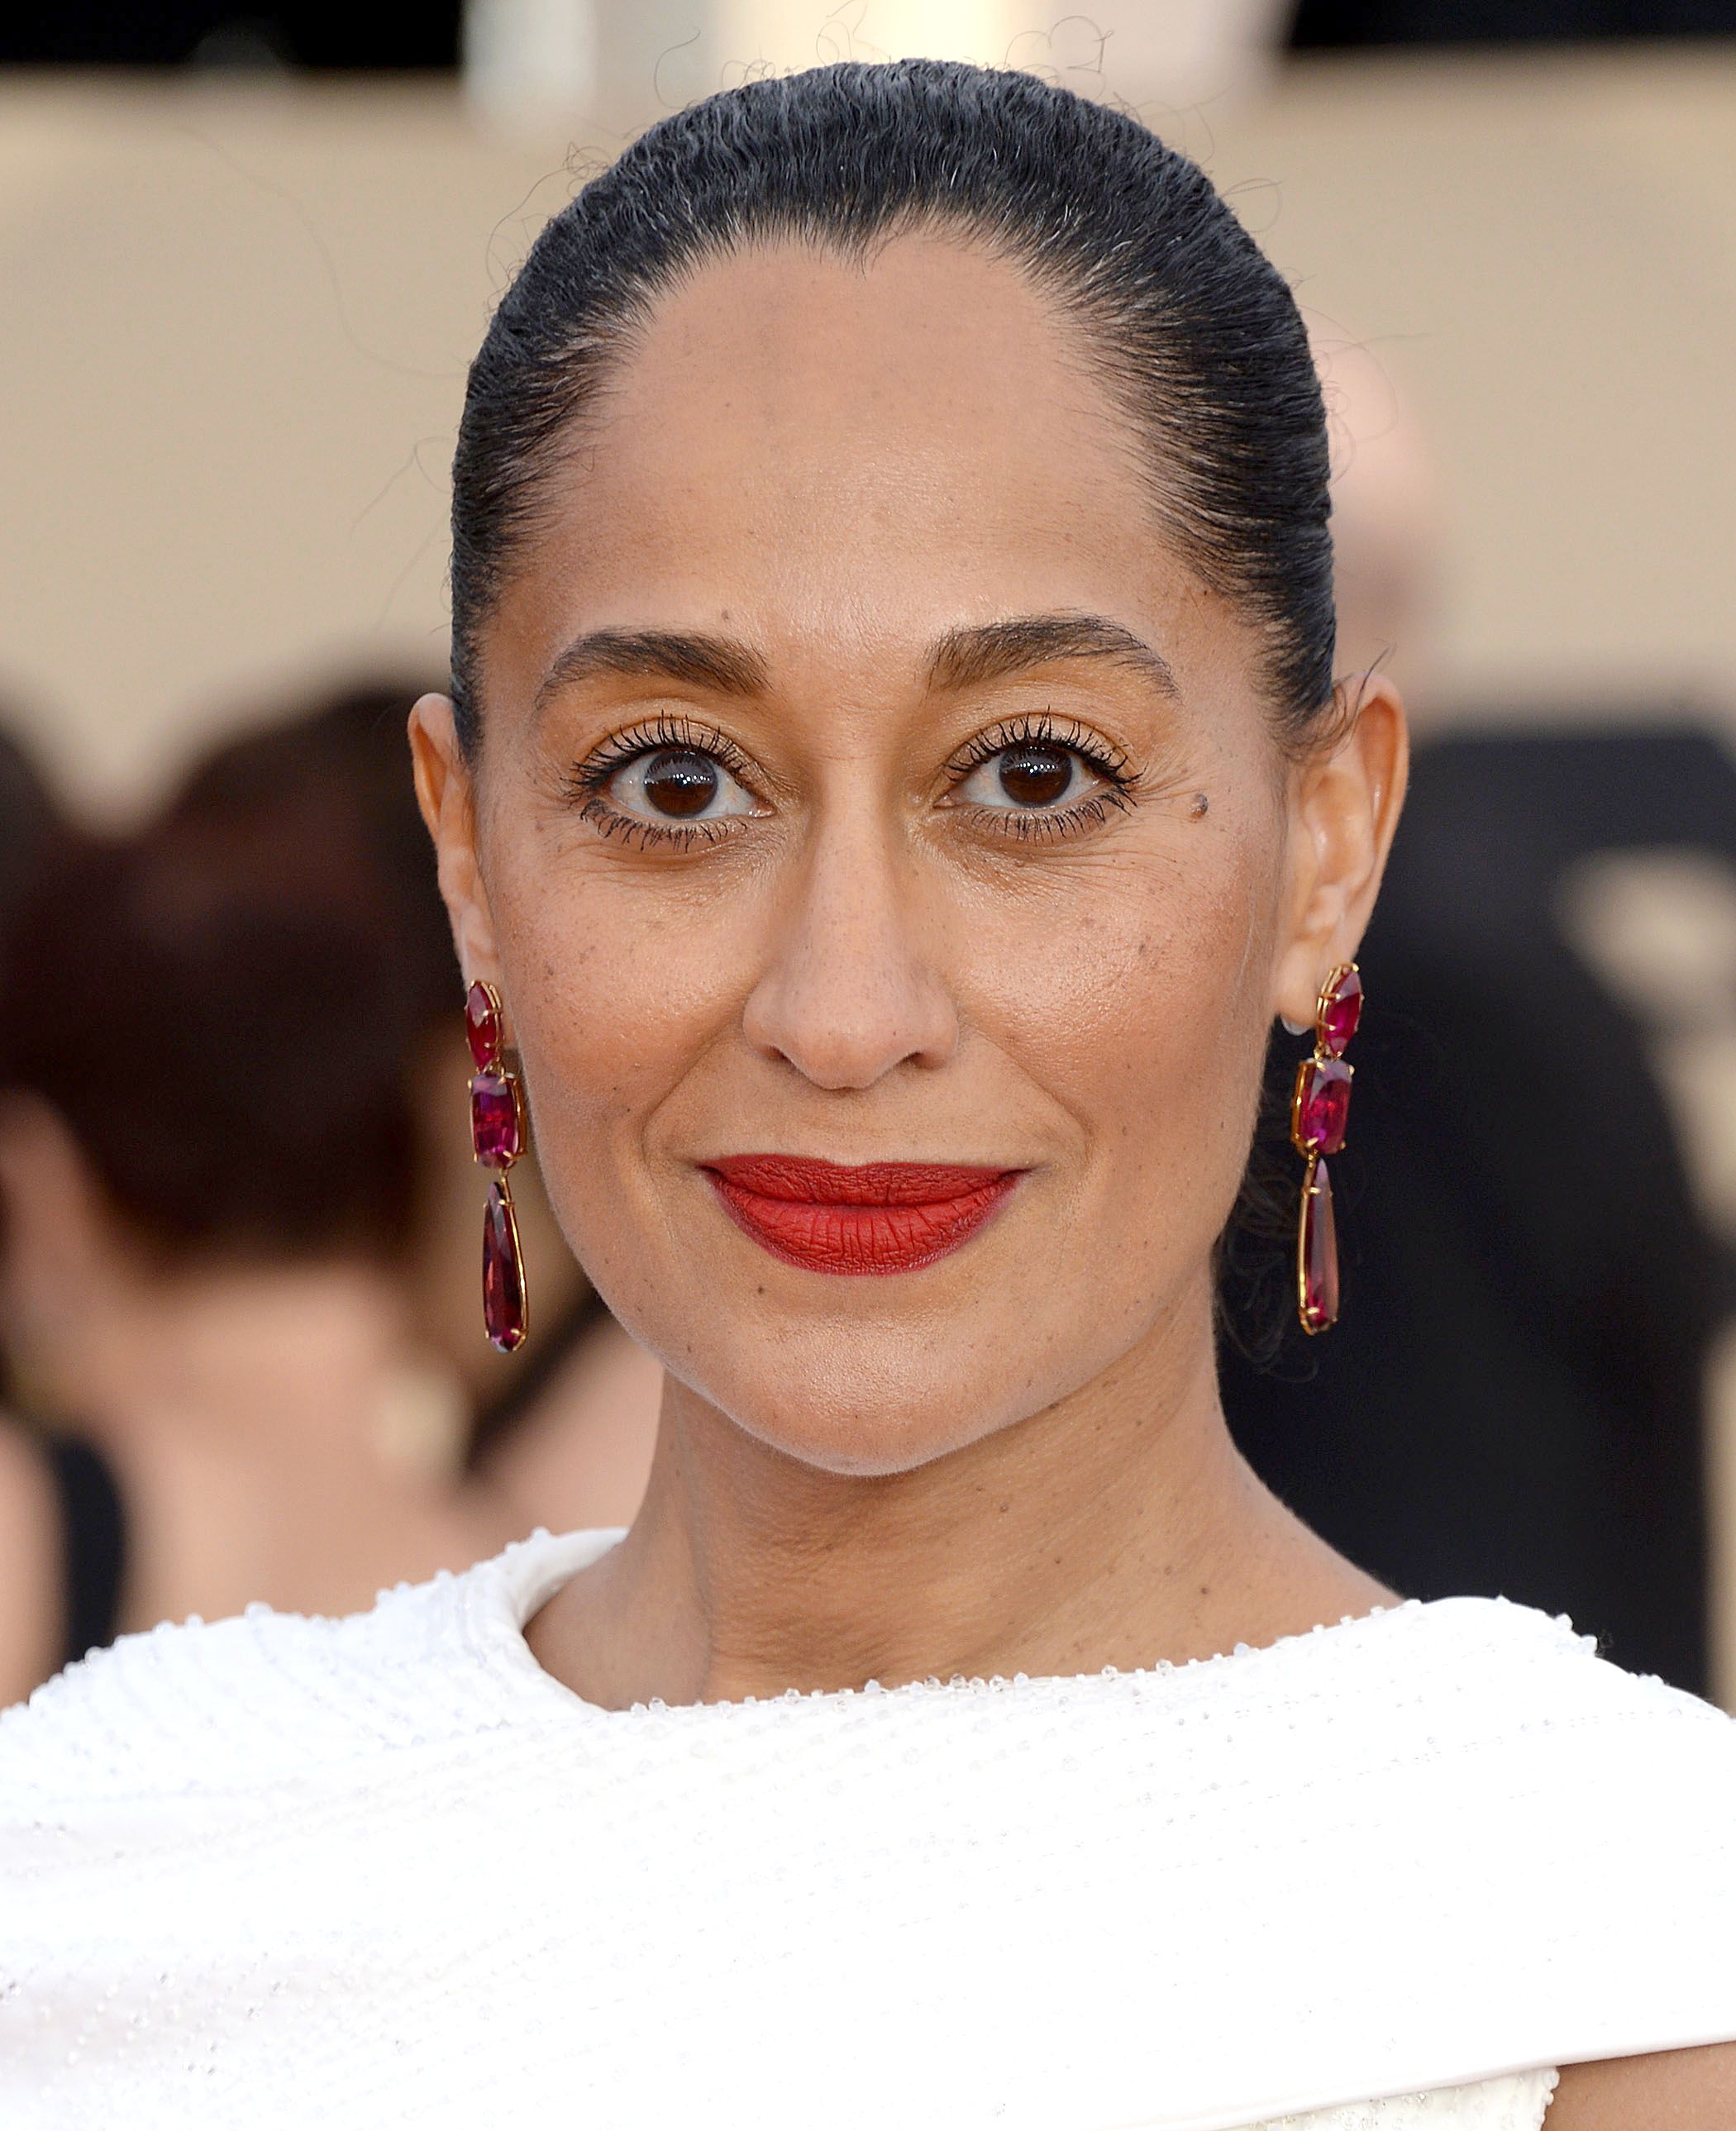 Earrings stole The Sag Awards Spotlight | Bejeweled